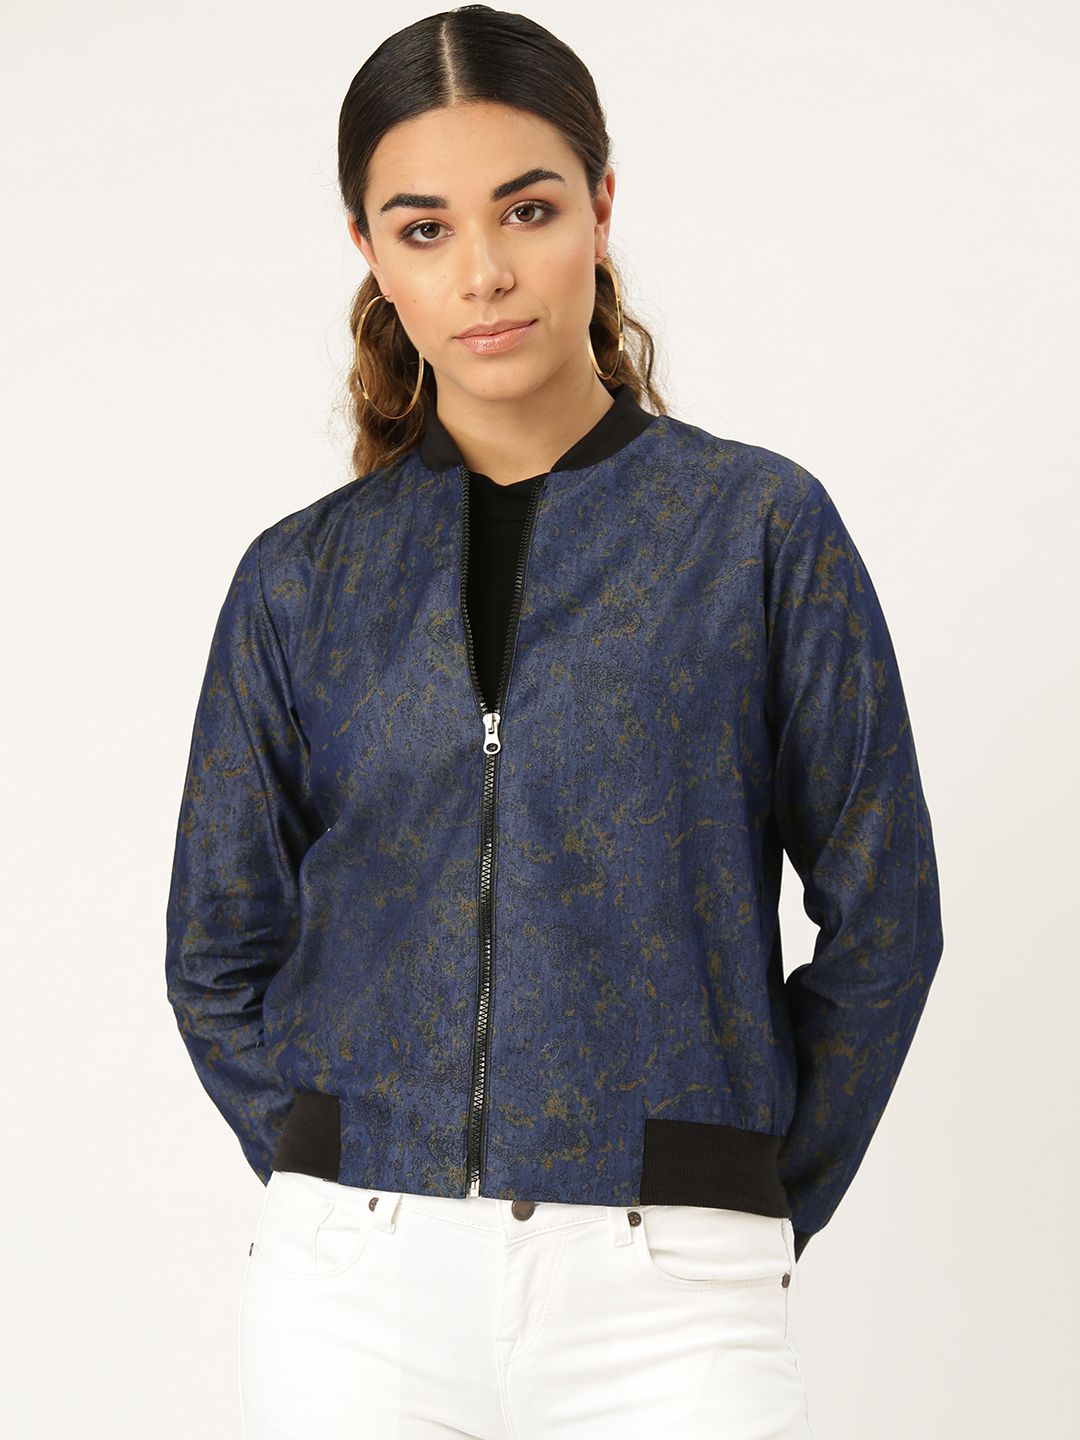 Style Quotient Women Navy Blue & Olive Green Printed Bomber Jacket Price in India